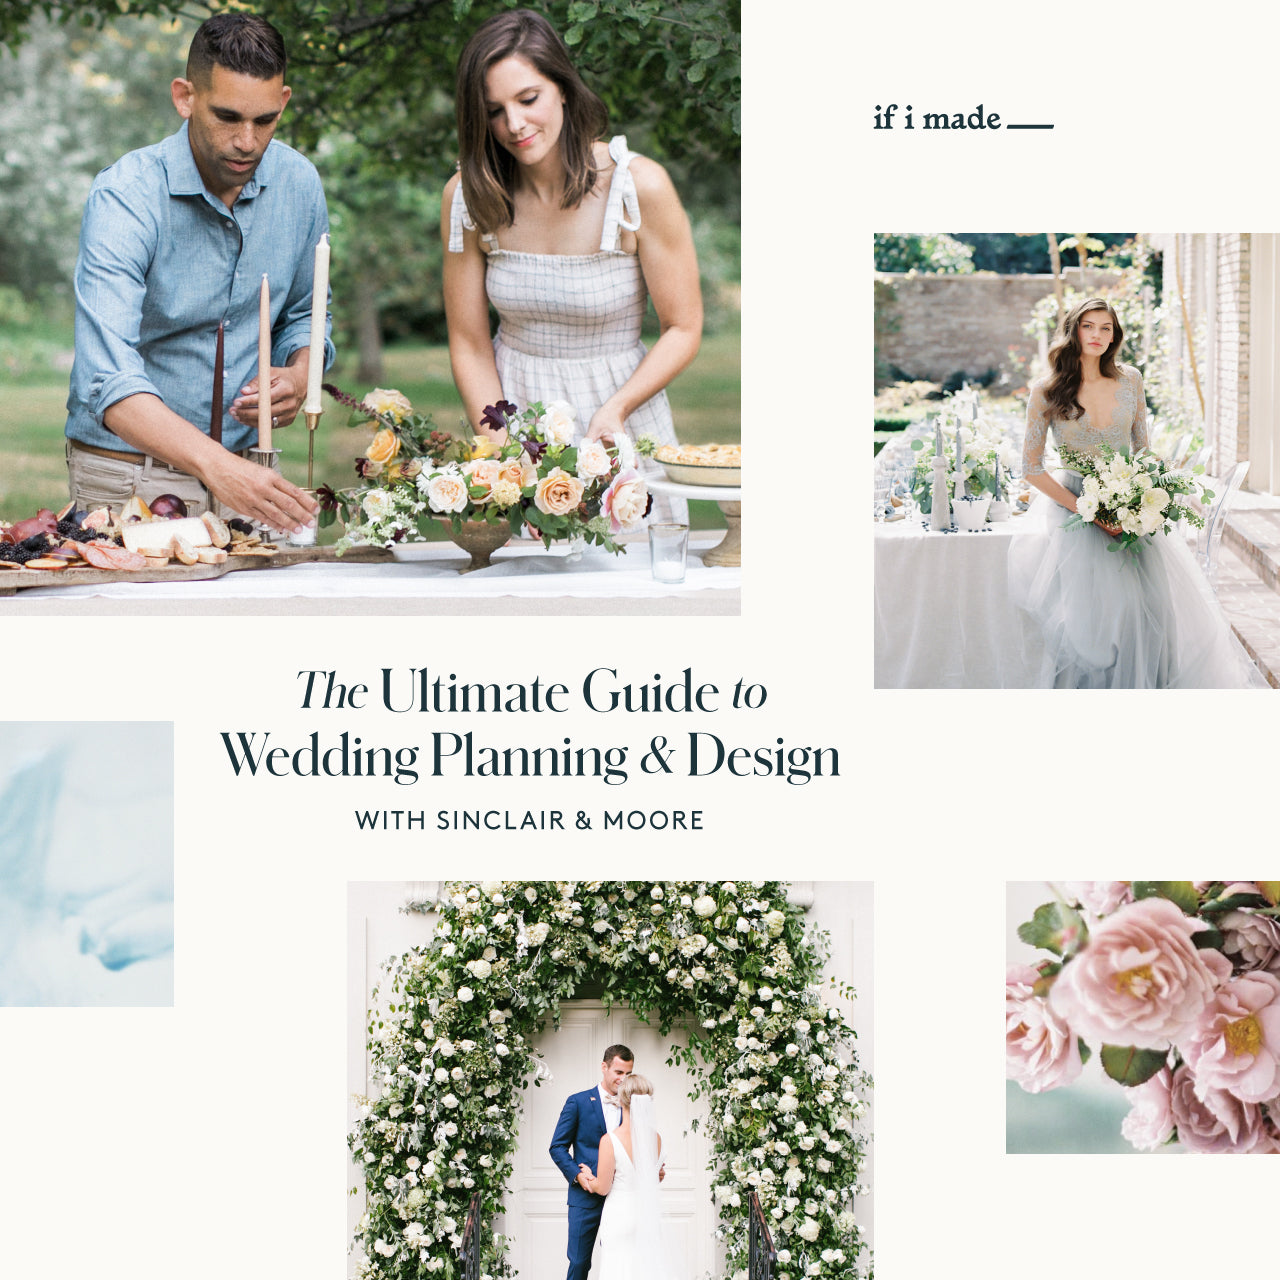 The Ultimate Guide to Wedding Planning & Design with Sinclair & Moore (SPP1020) - 18 payments of $99